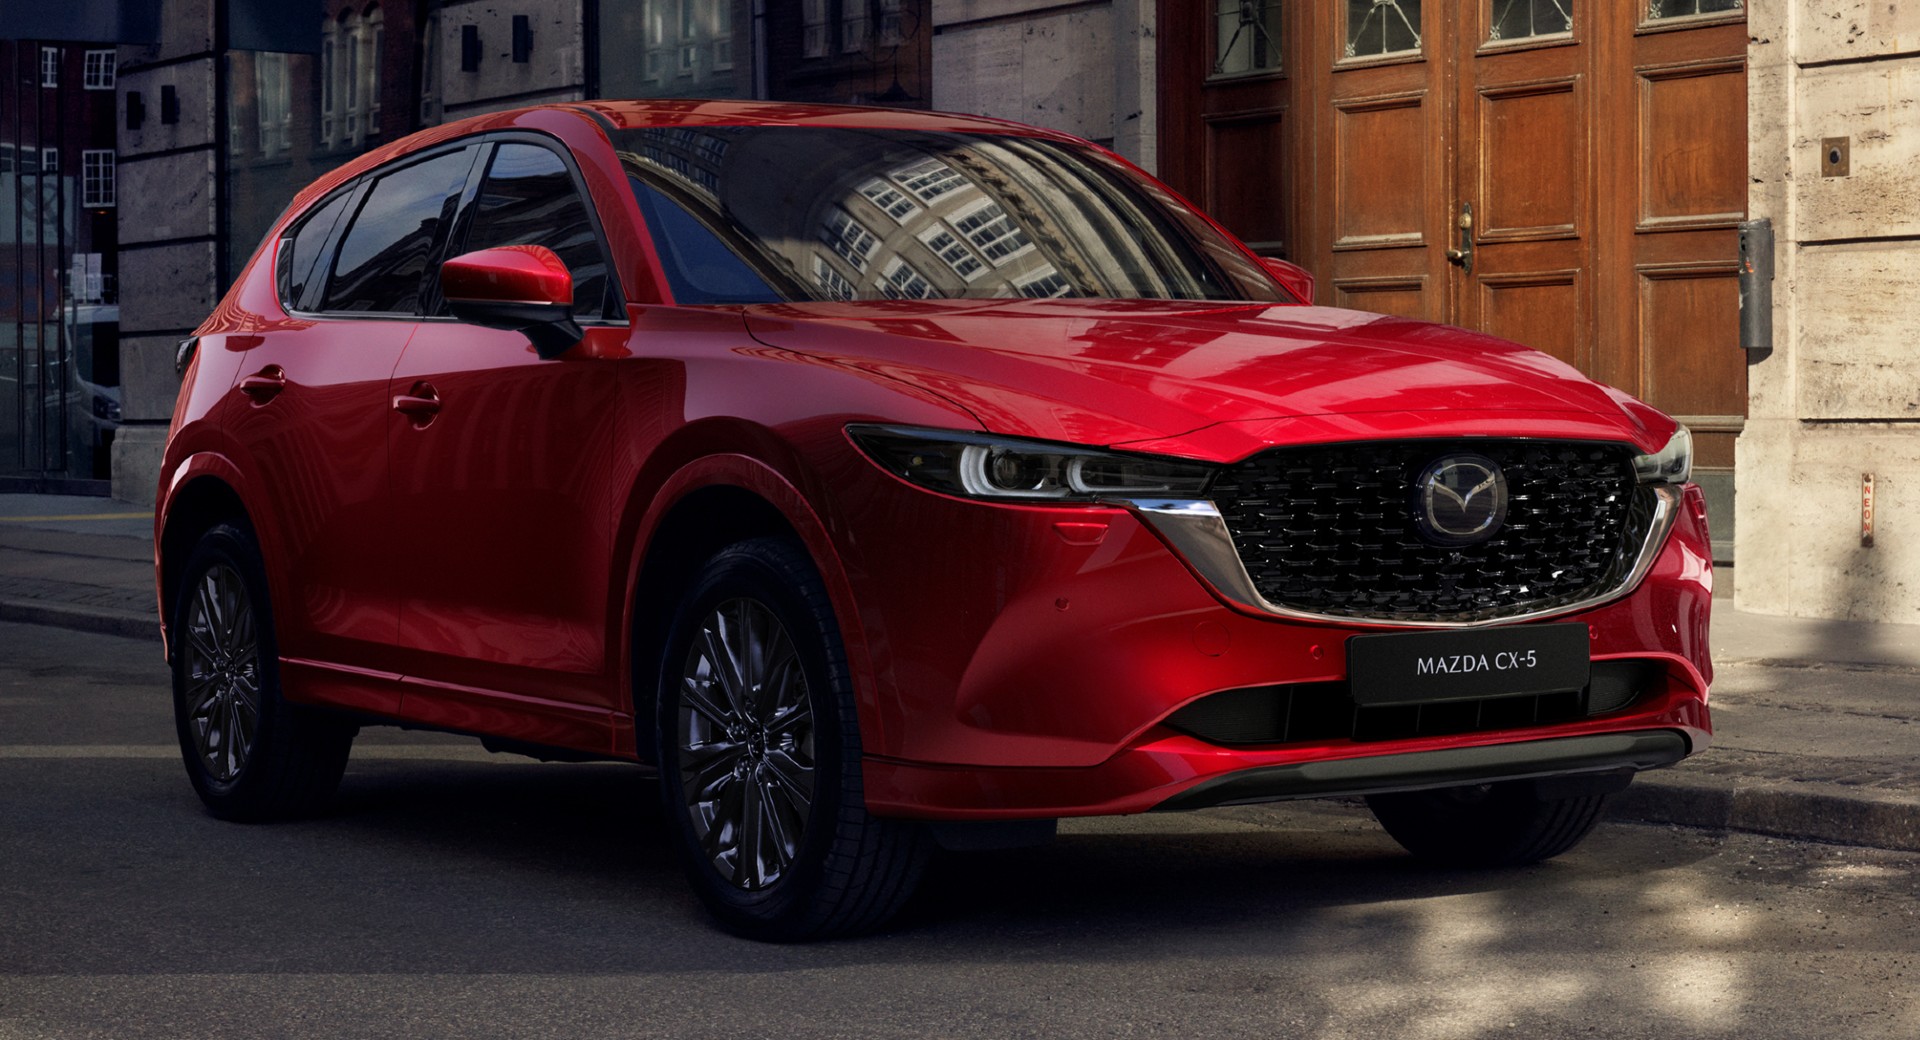 Vies Korst Grondig 2022 Mazda CX-5 Revealed With Standard AWD And Refreshed Styling | Carscoops